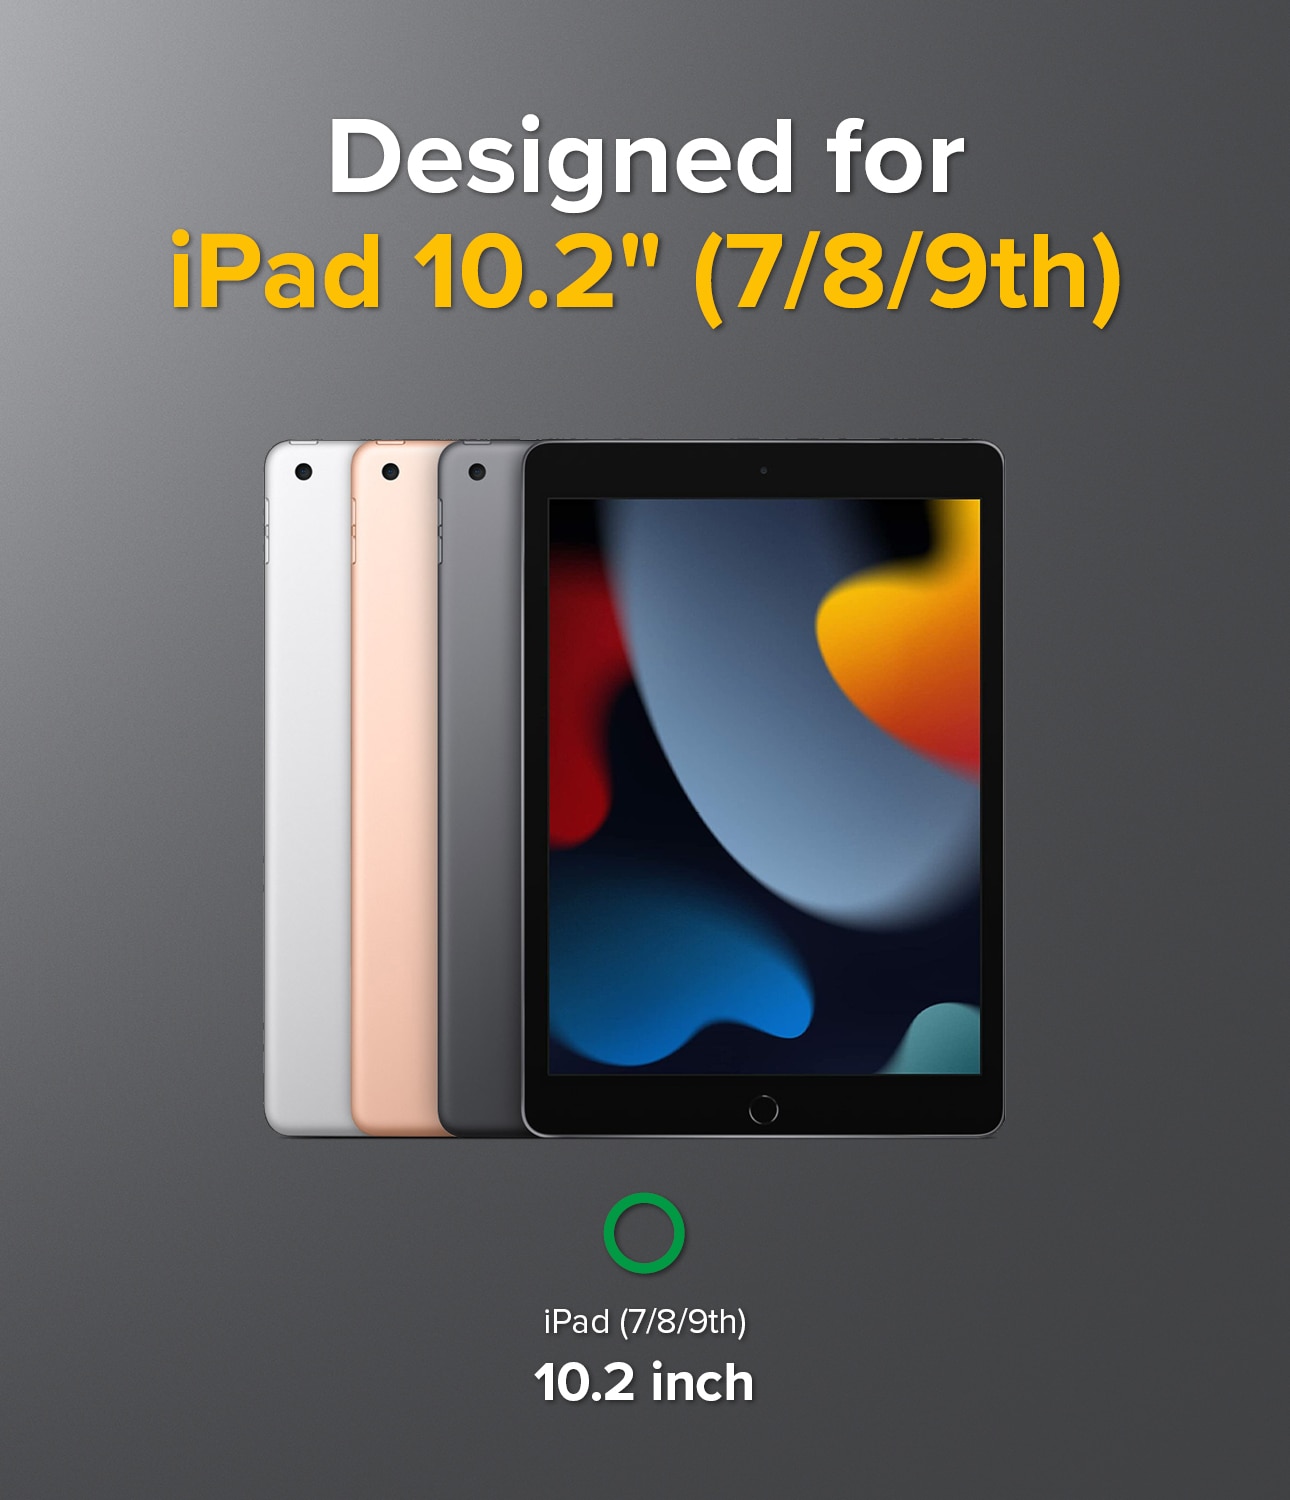 Cover Fusion Plus iPad 10.2 7th Gen (2019) White/Lime Glow